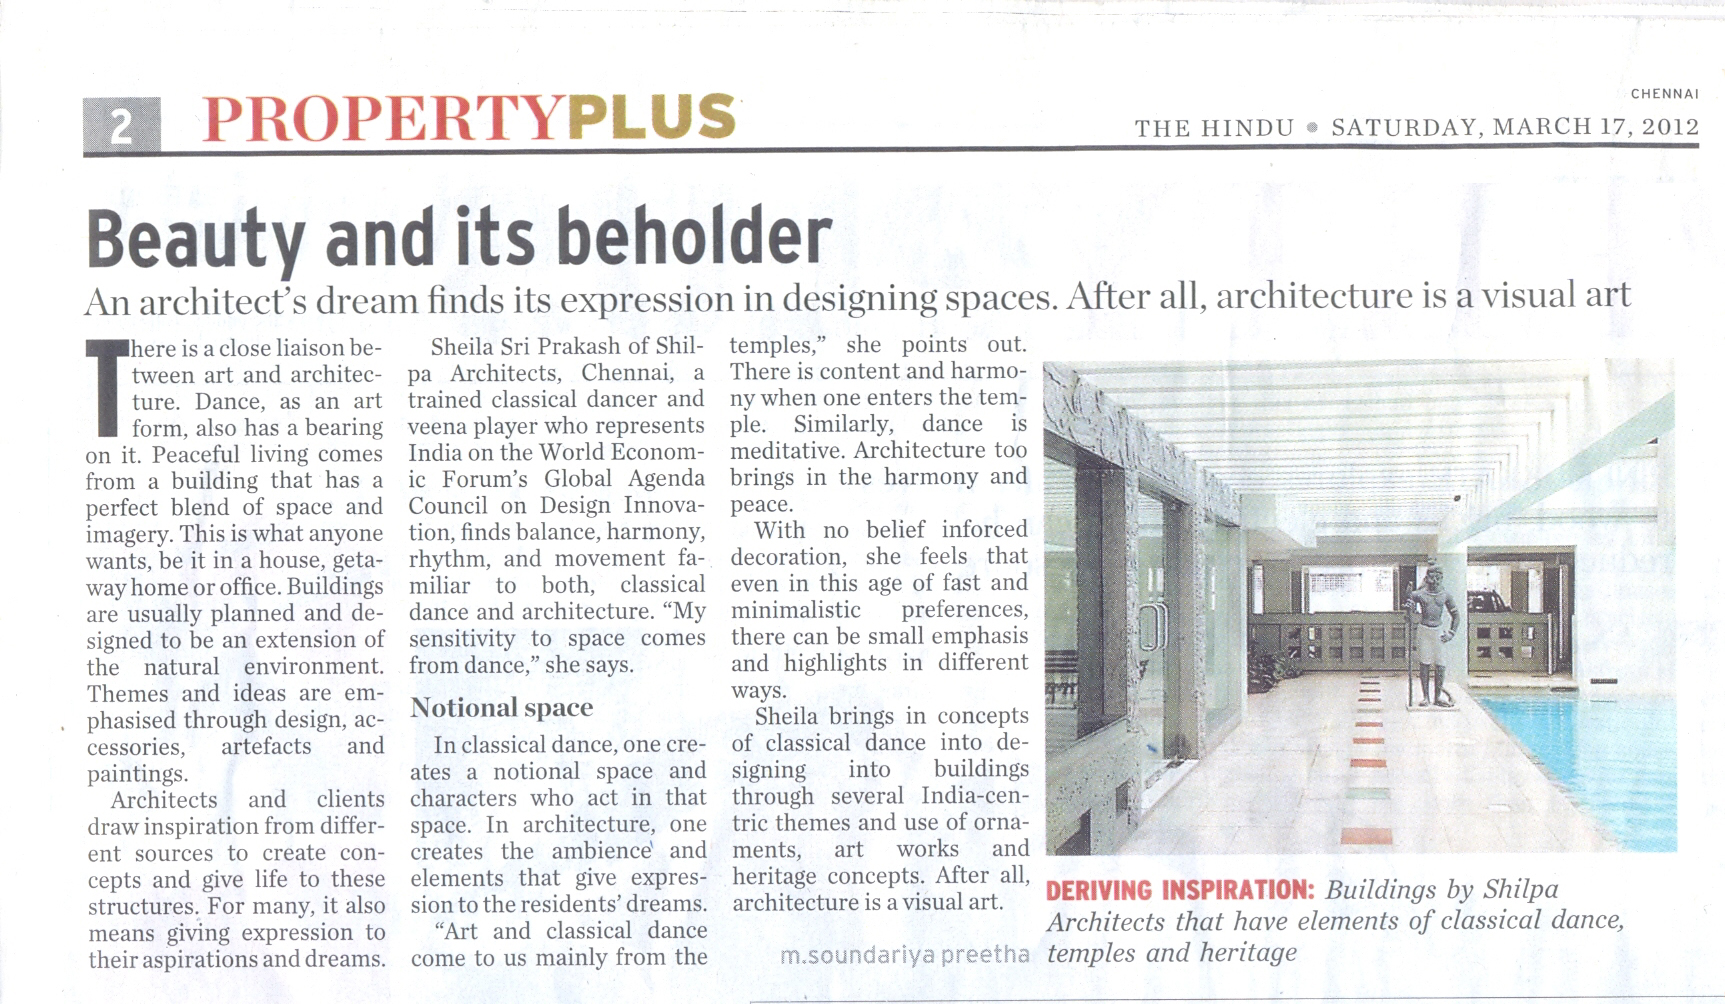 The Hindu, 17 March 2012: Beauty and its beholder - An Architect's dream finds its expression in designing spaces. After all, architecture is a visual art.